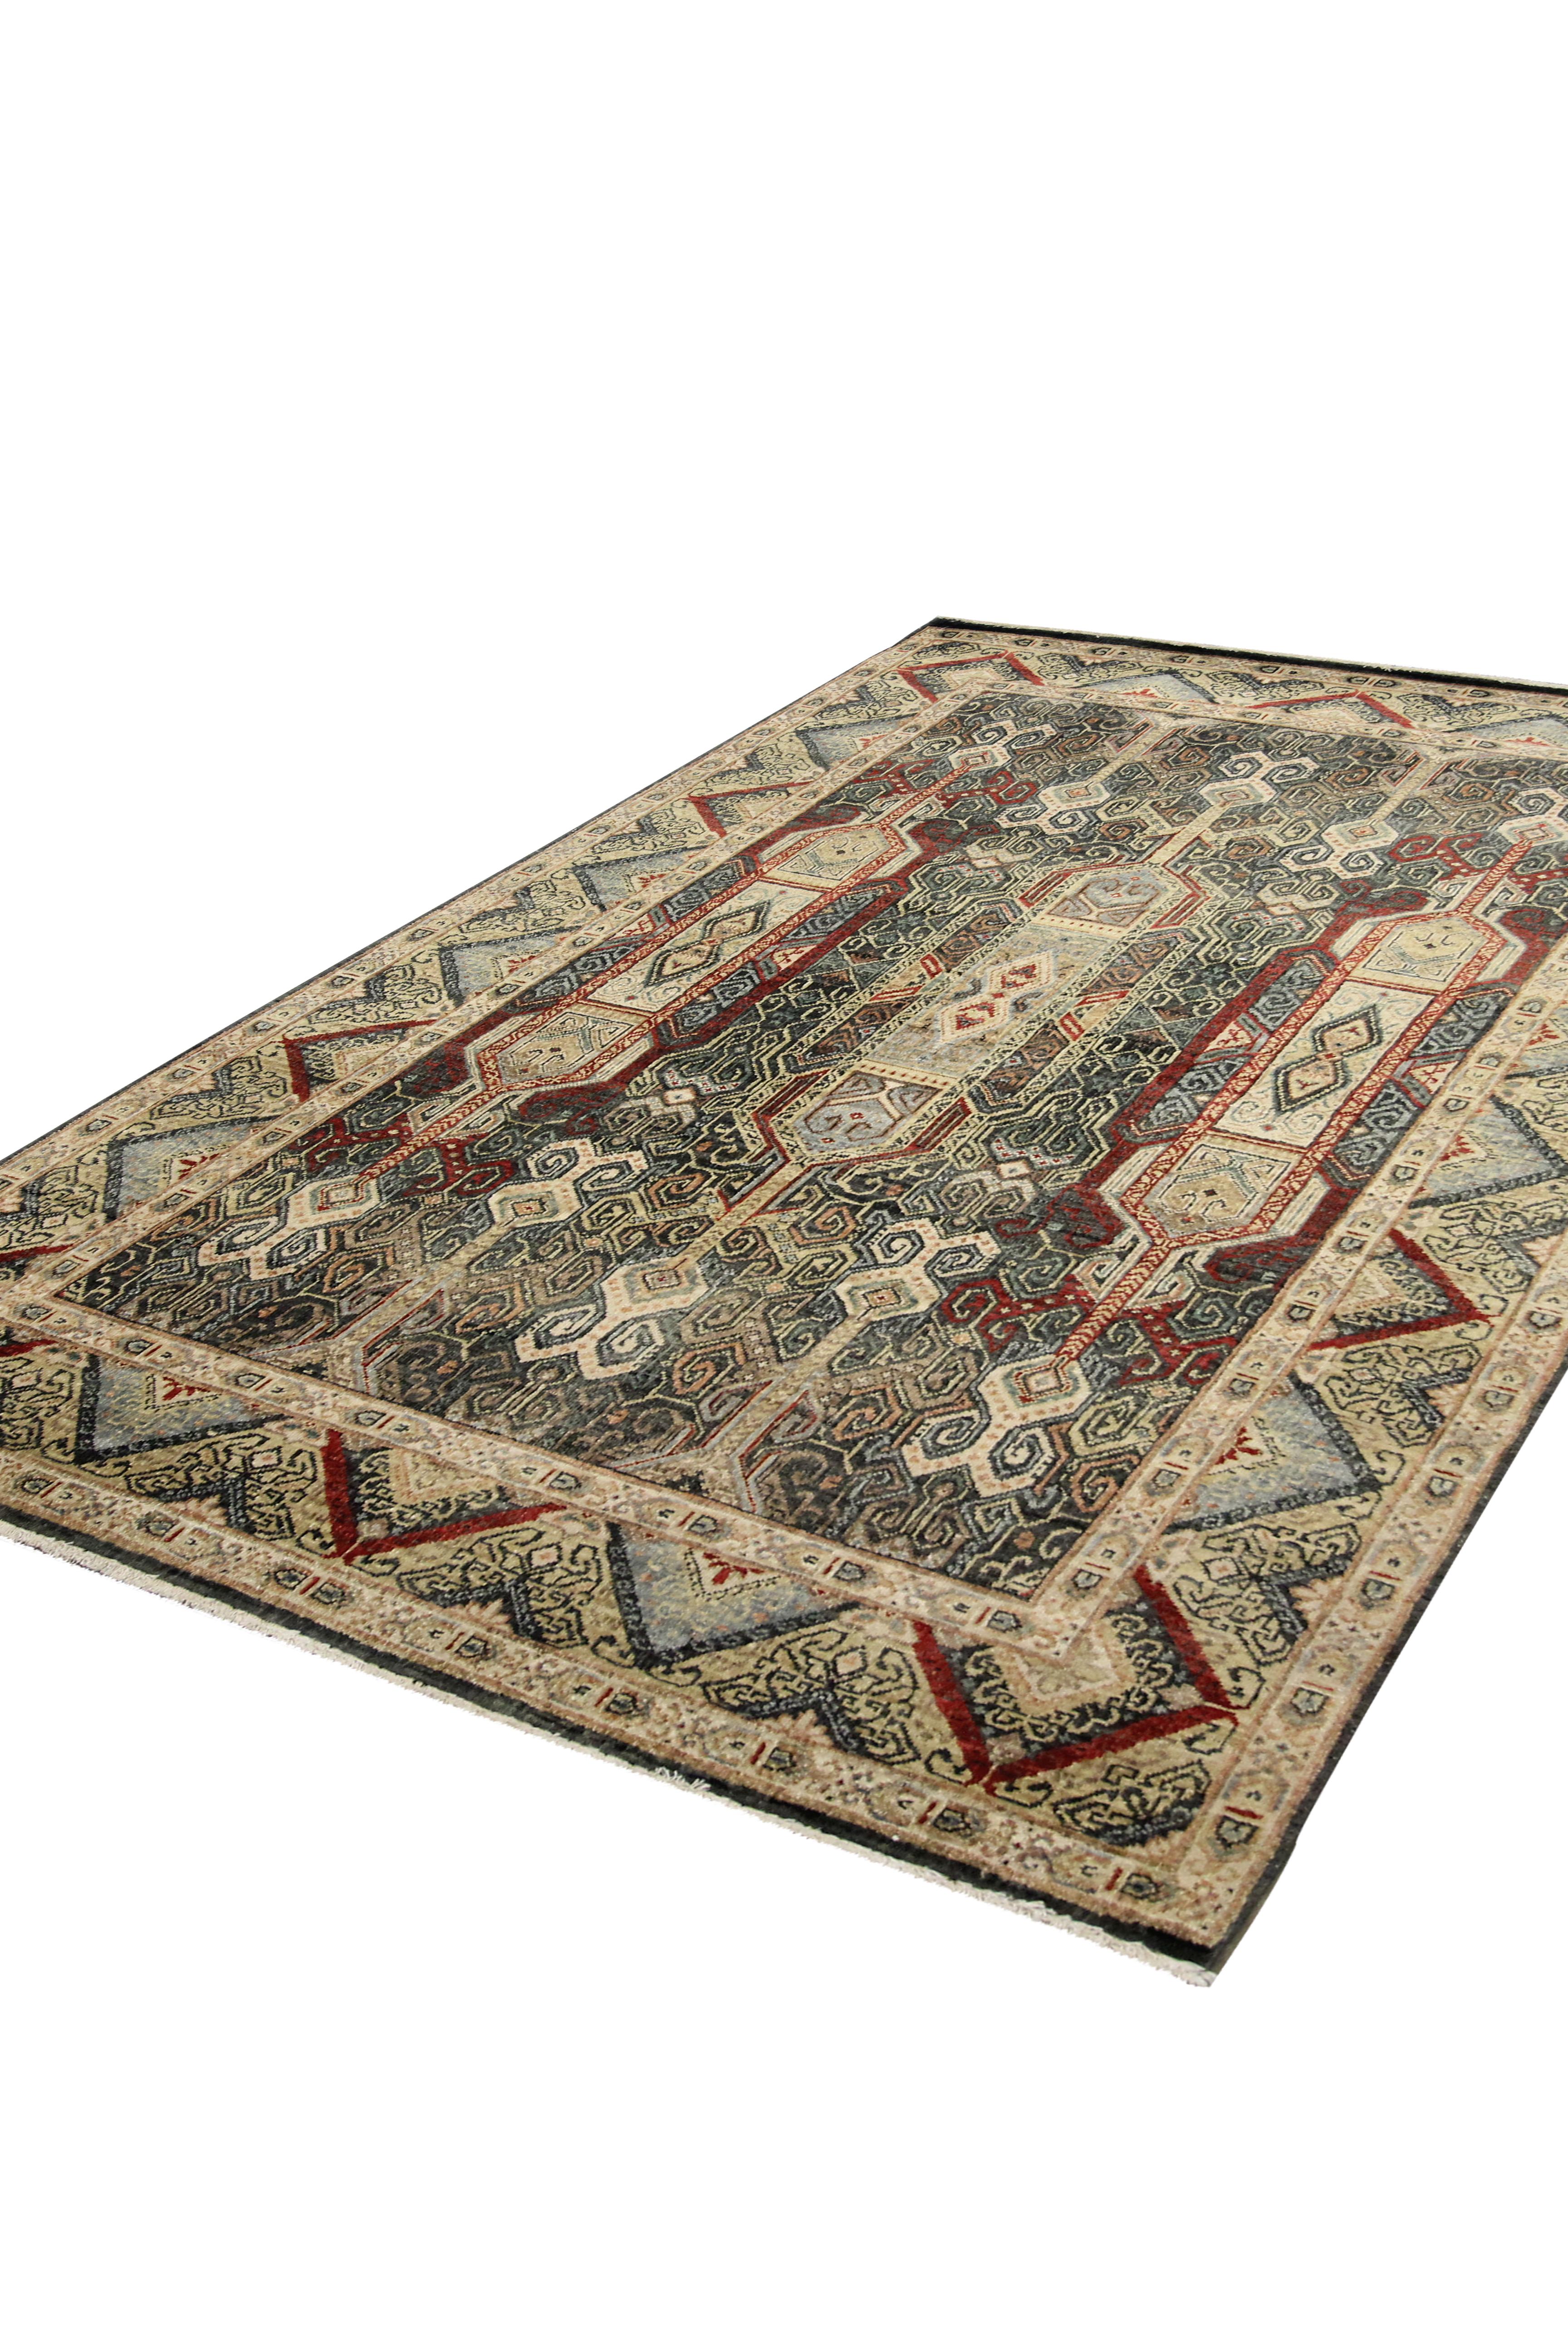 Hand-Knotted Handmade Carpet Traditional Indian Wool Area Rug Beige Green Geometric For Sale